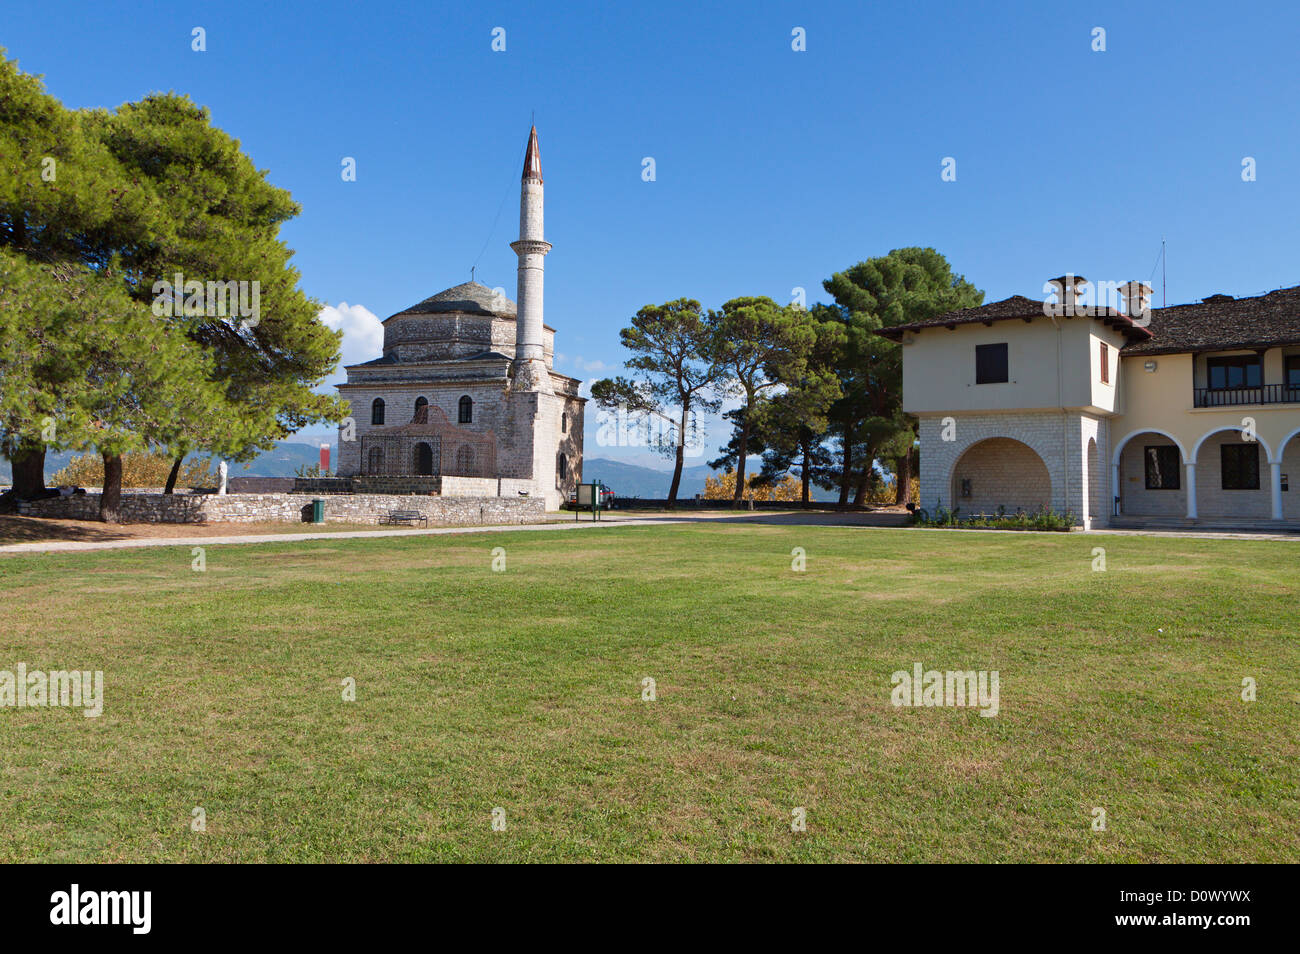 Fethiye Mosque and the tomb of Ali Pasha at Ioannina city in Greece Stock Photo